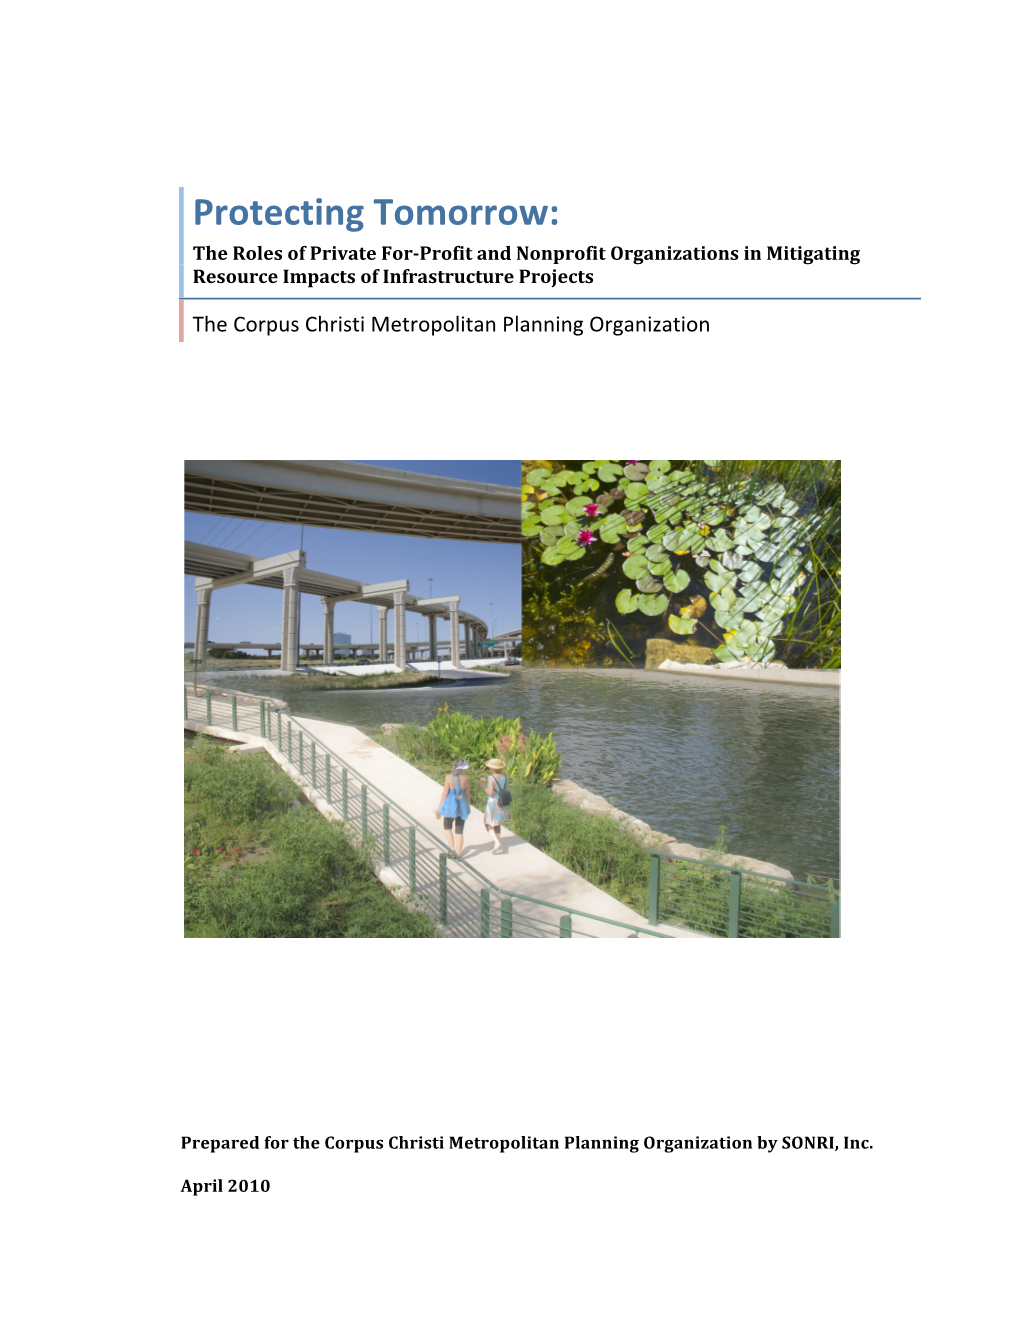 Appendix P: Protecting Tomorrow:The Roles of Private for Profit and Nonprofit Organizations in Mitigating Resource